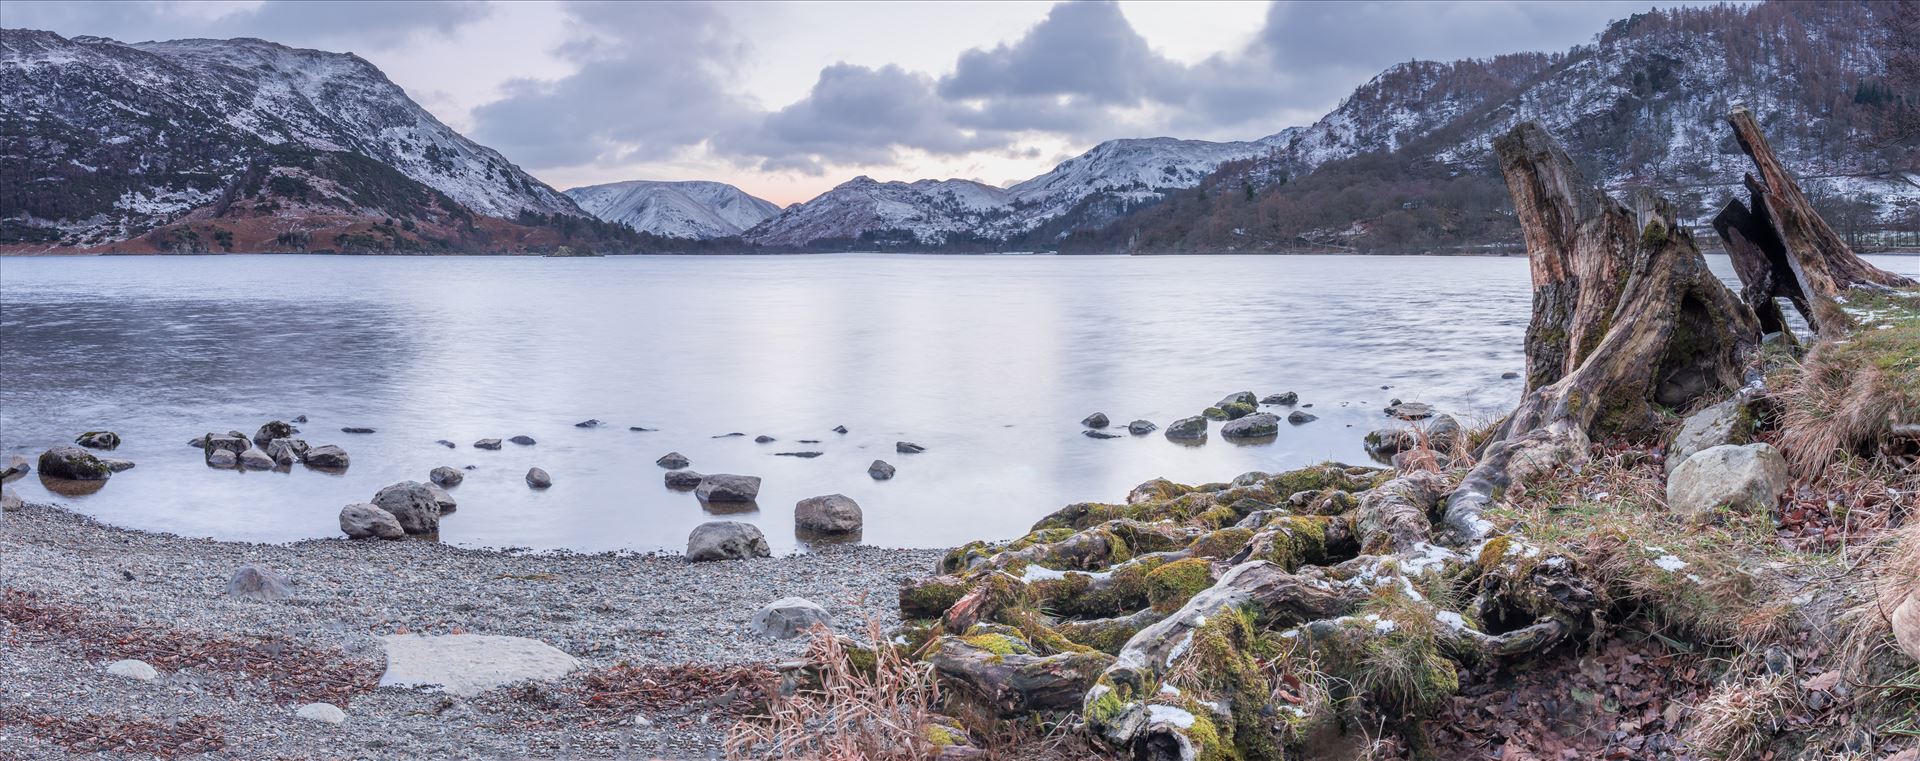 Ullswater at sunset - This is 6 separate shots stitched together to create a panoramic shot of the beautiful lake Ullswater. by philreay